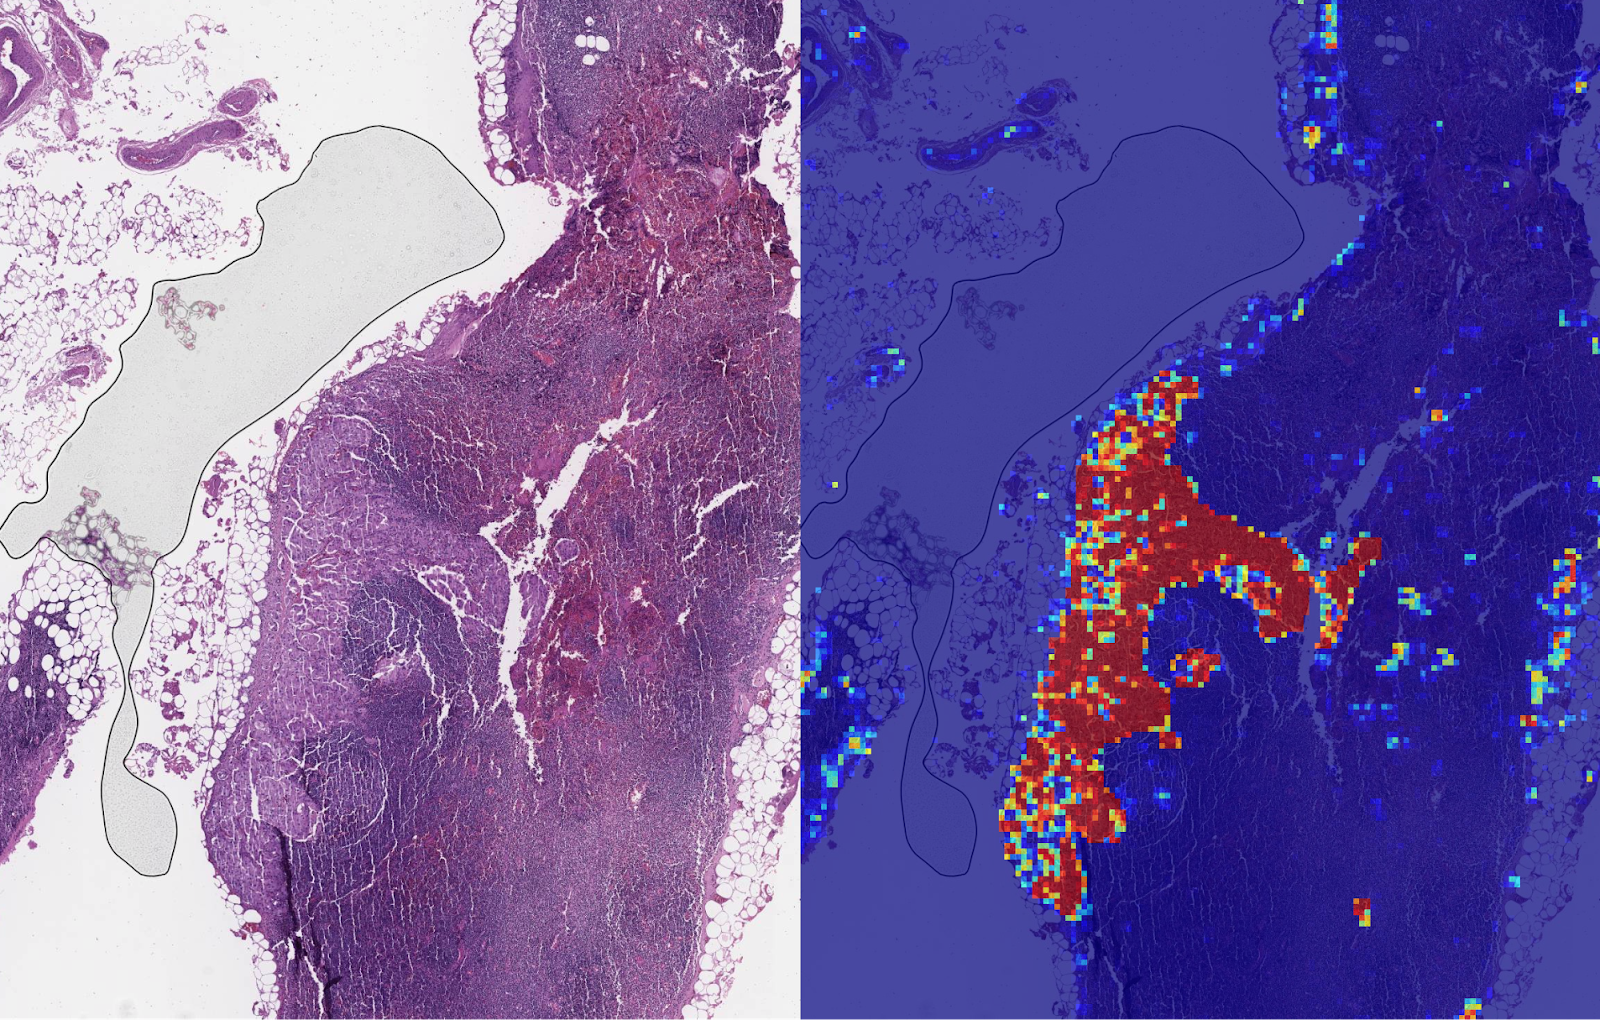 An AI-based breast cancer detector in action